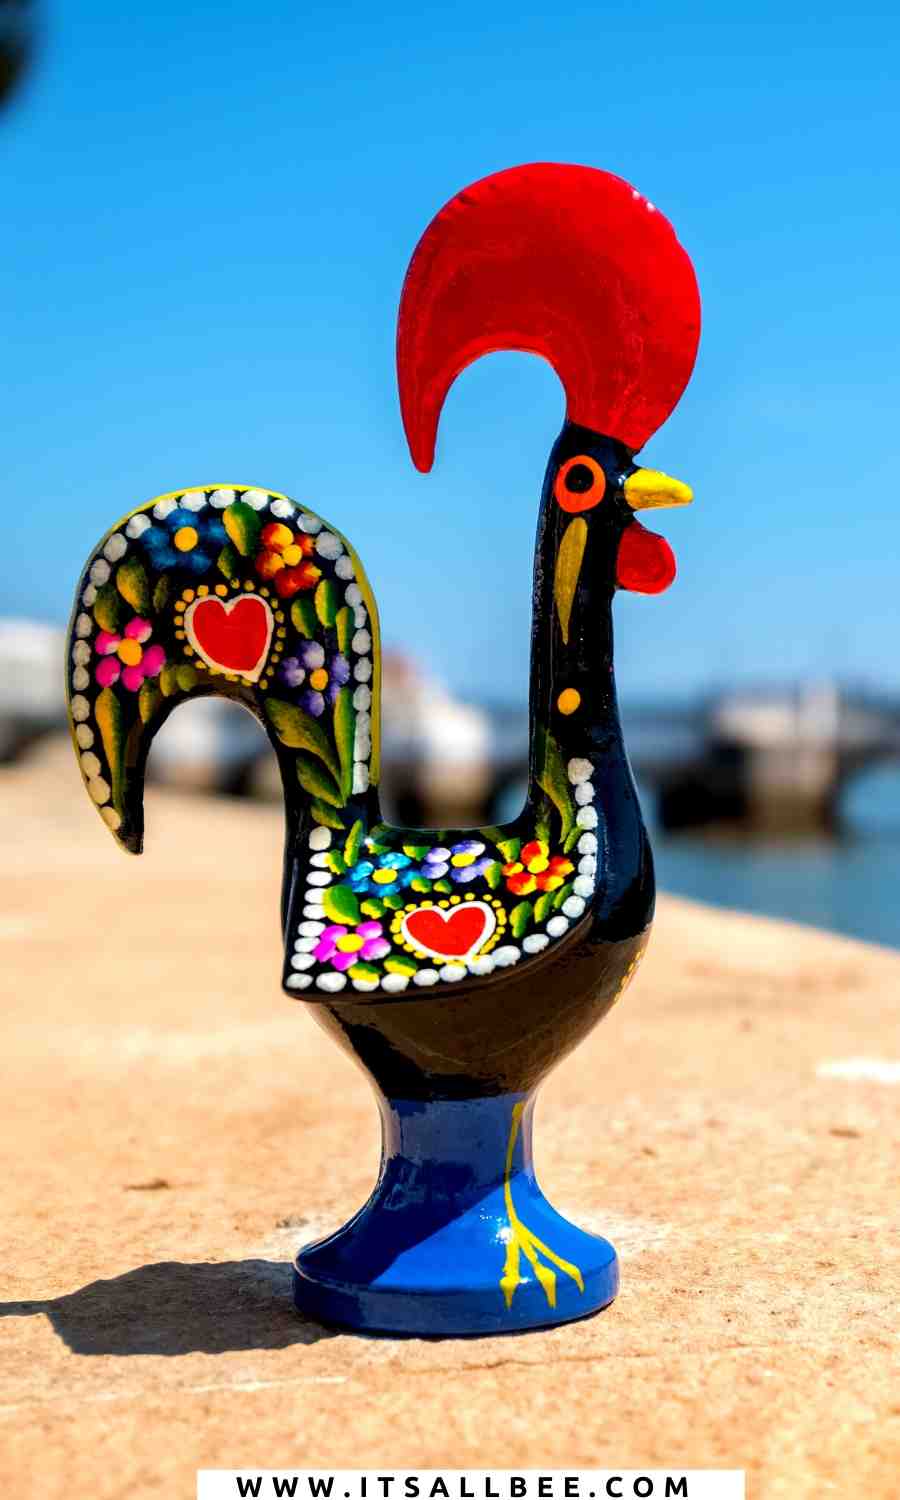 the symbol of Portugal and typical souvenir